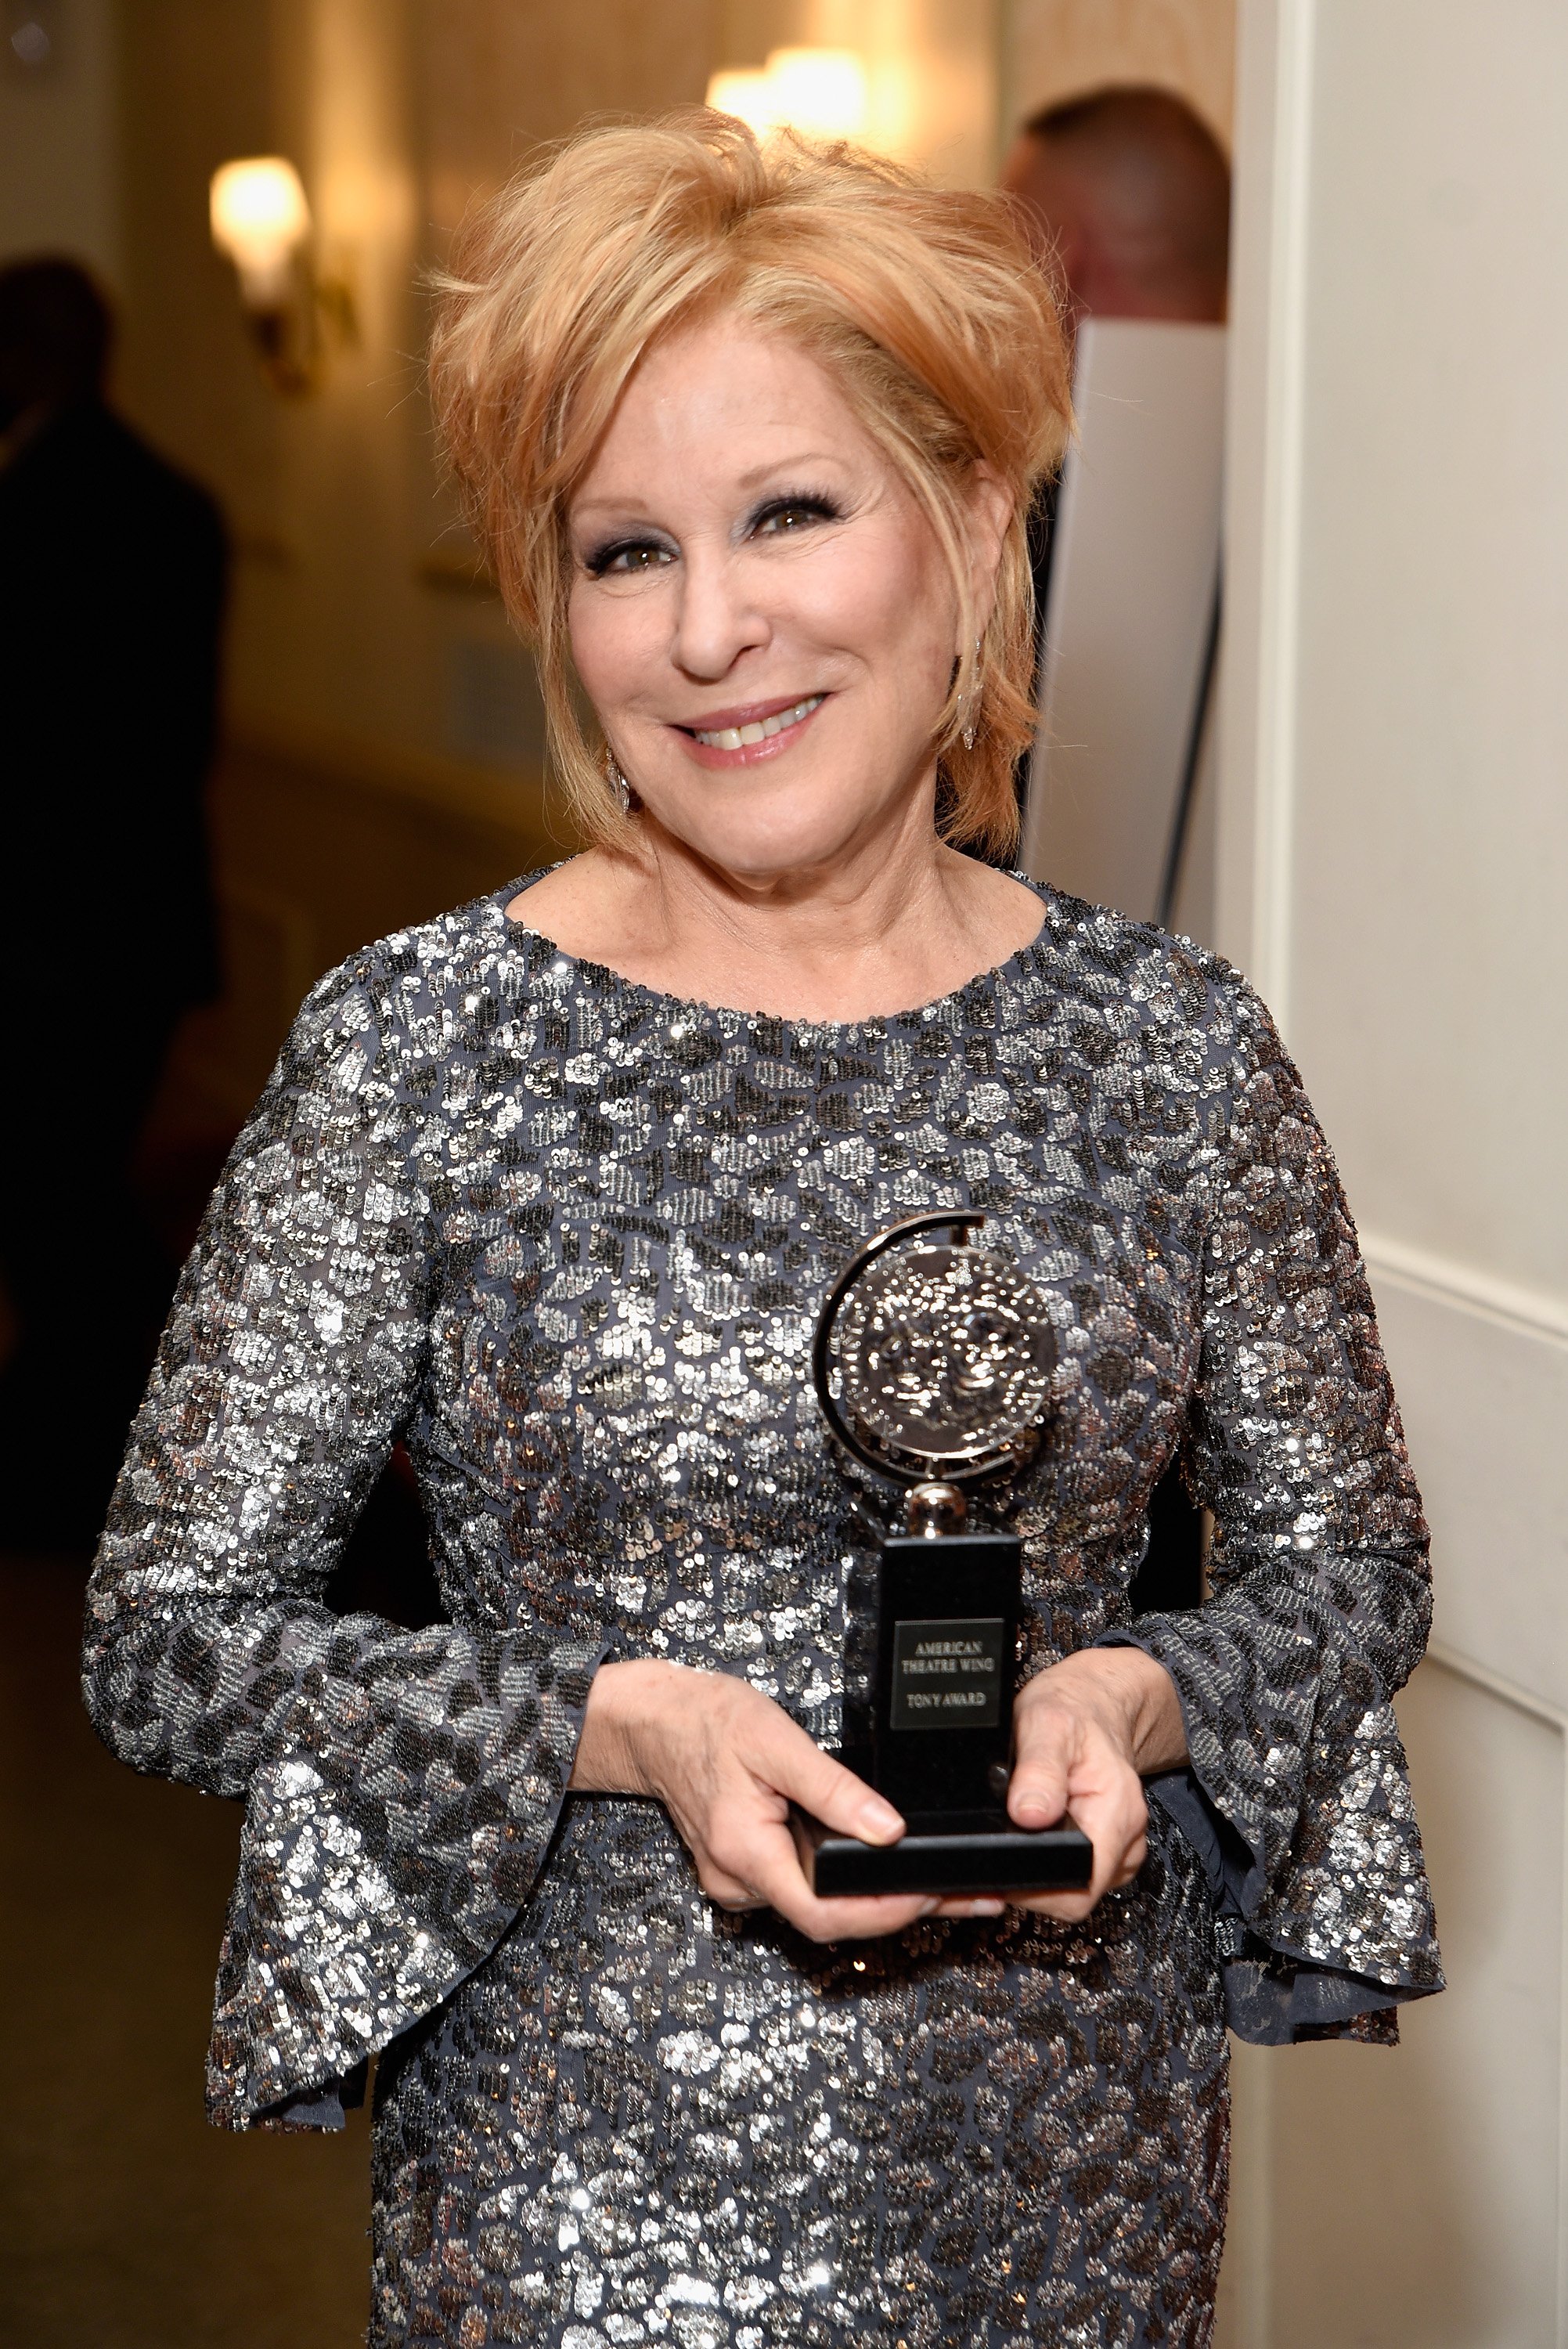 Bette Midler attend the 2017 Tony Awards on June 11, 2017, in New York City. | Source: Getty Images.